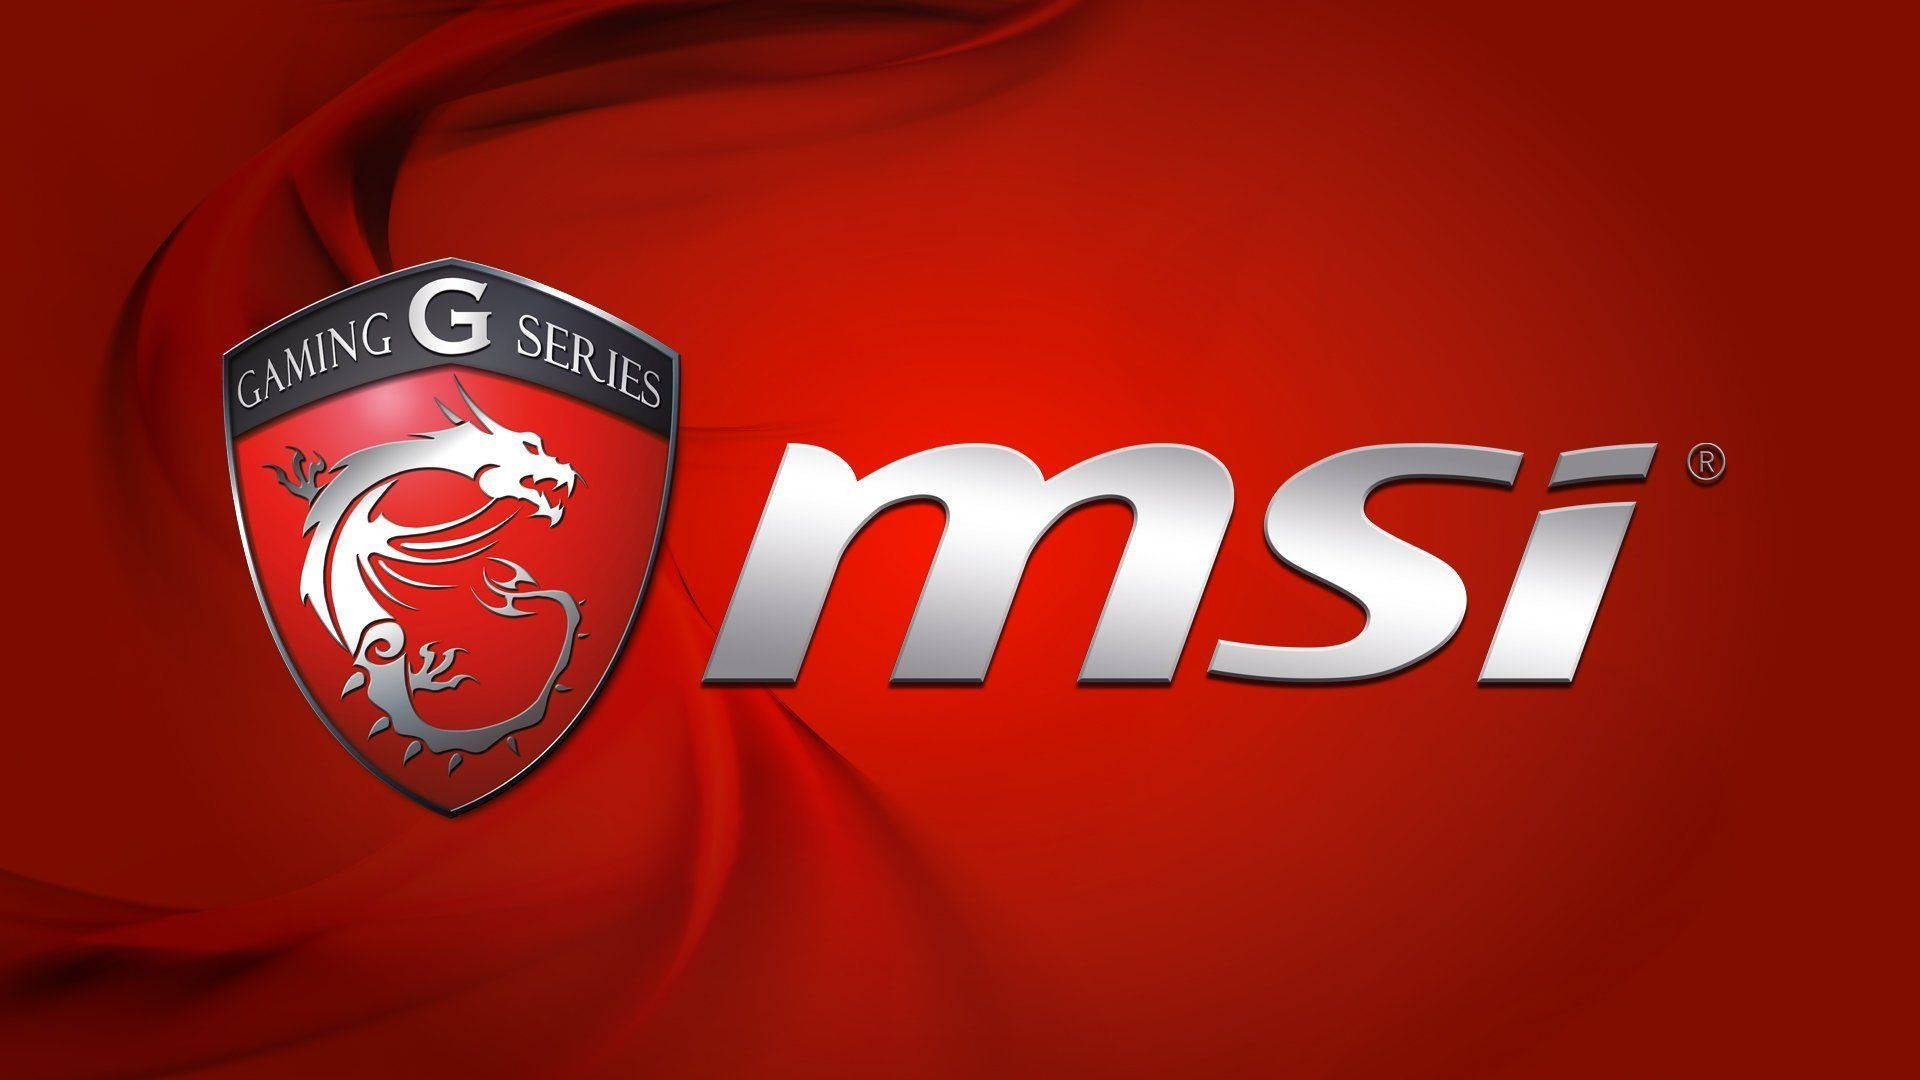 Msi Gaming G Series Logo On Red Fabric Background